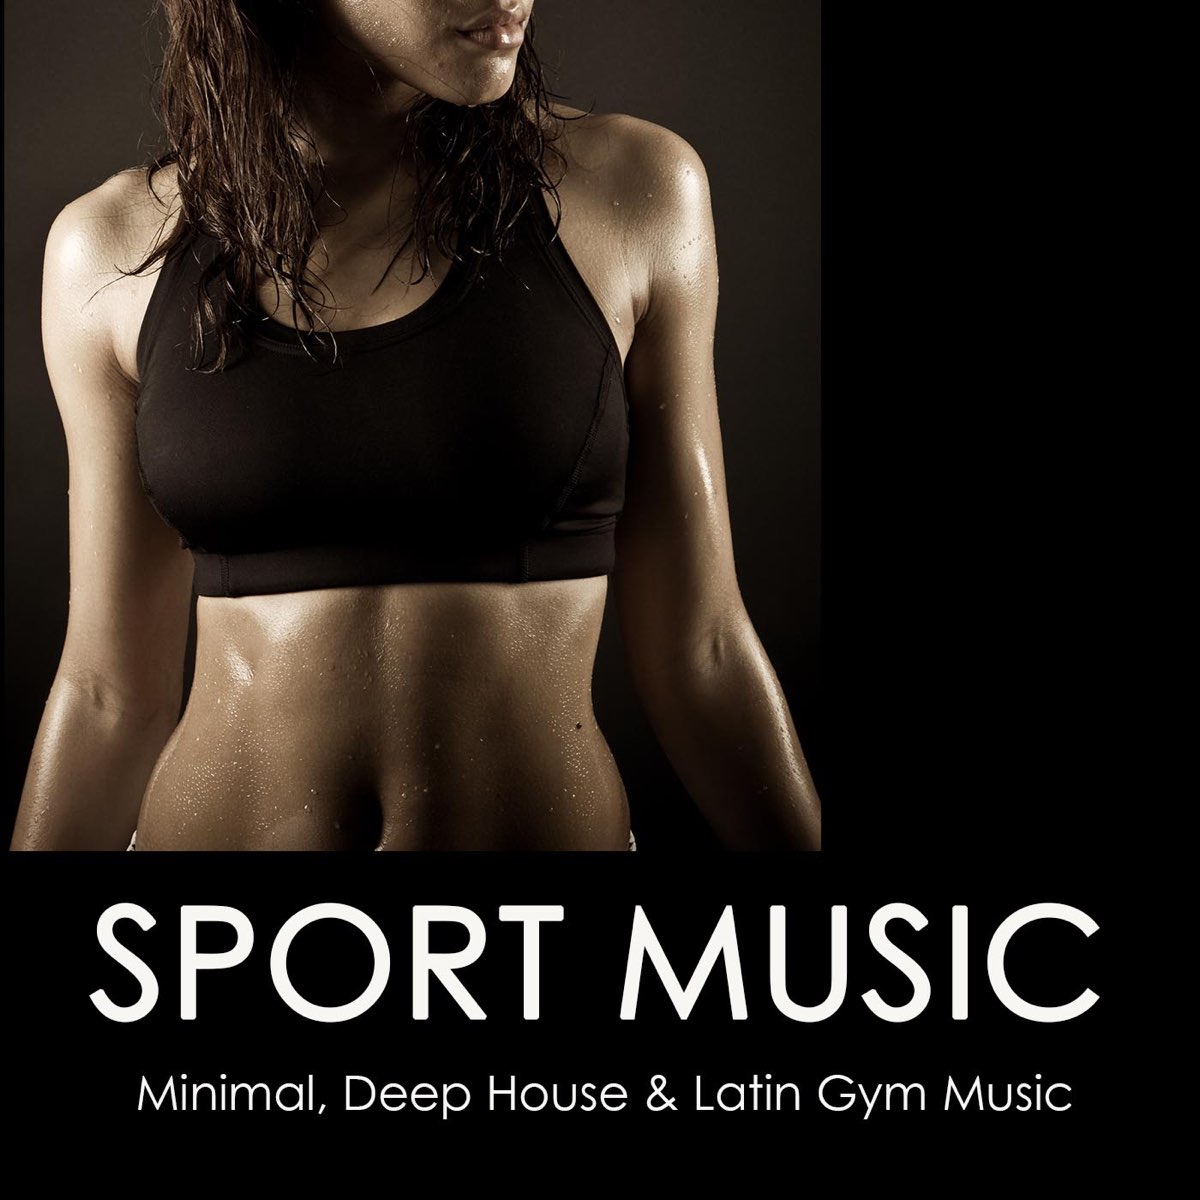 Music for sports